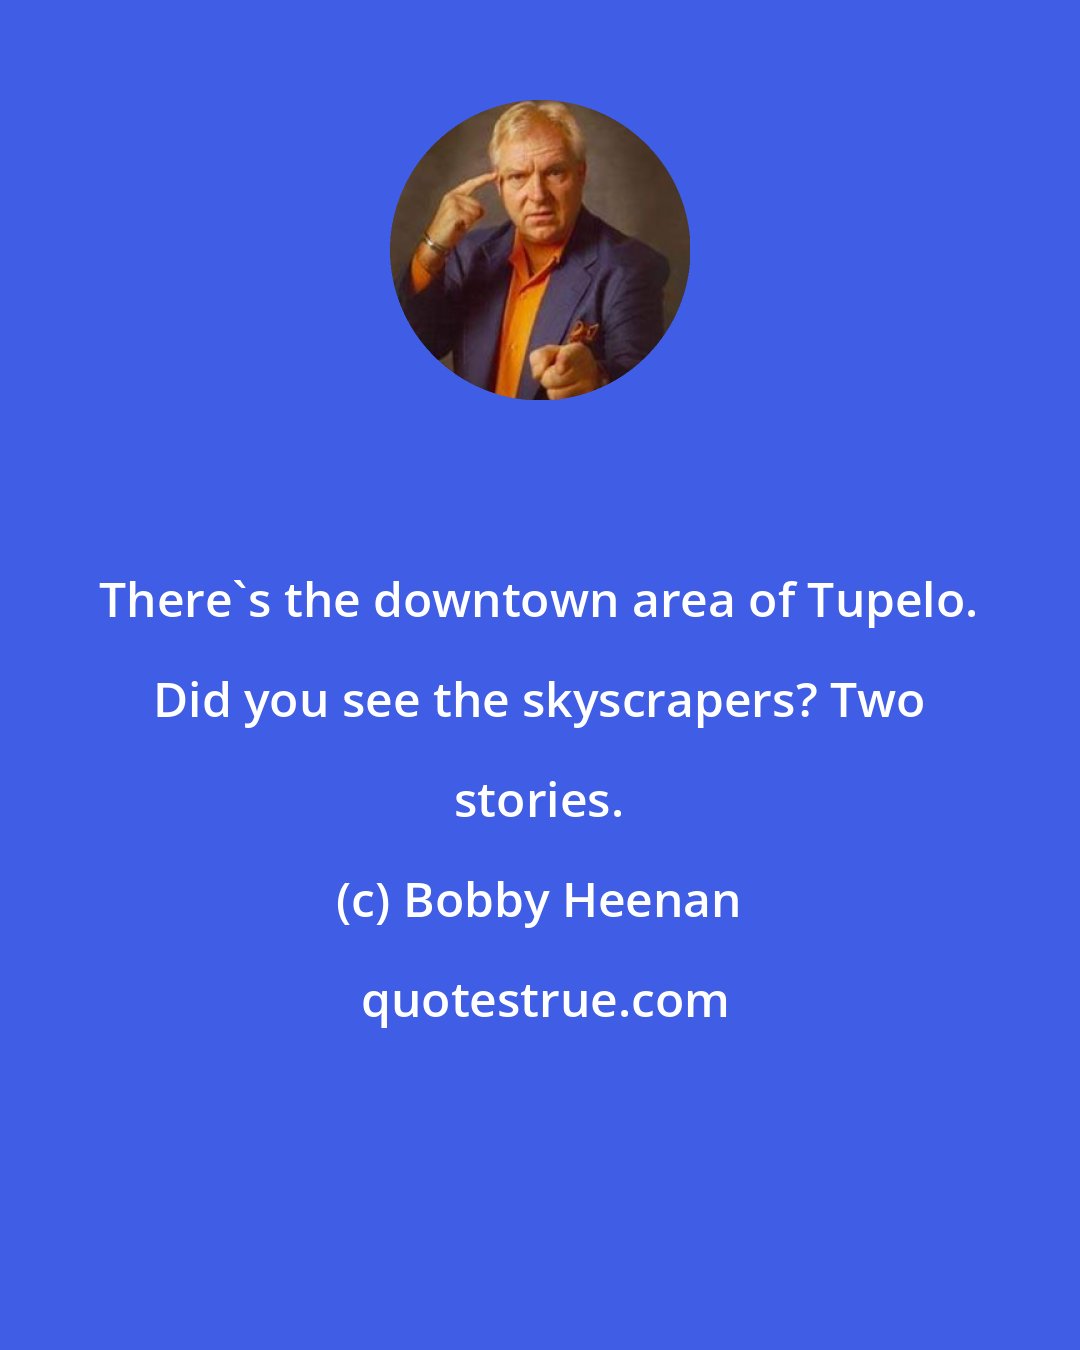 Bobby Heenan: There's the downtown area of Tupelo. Did you see the skyscrapers? Two stories.